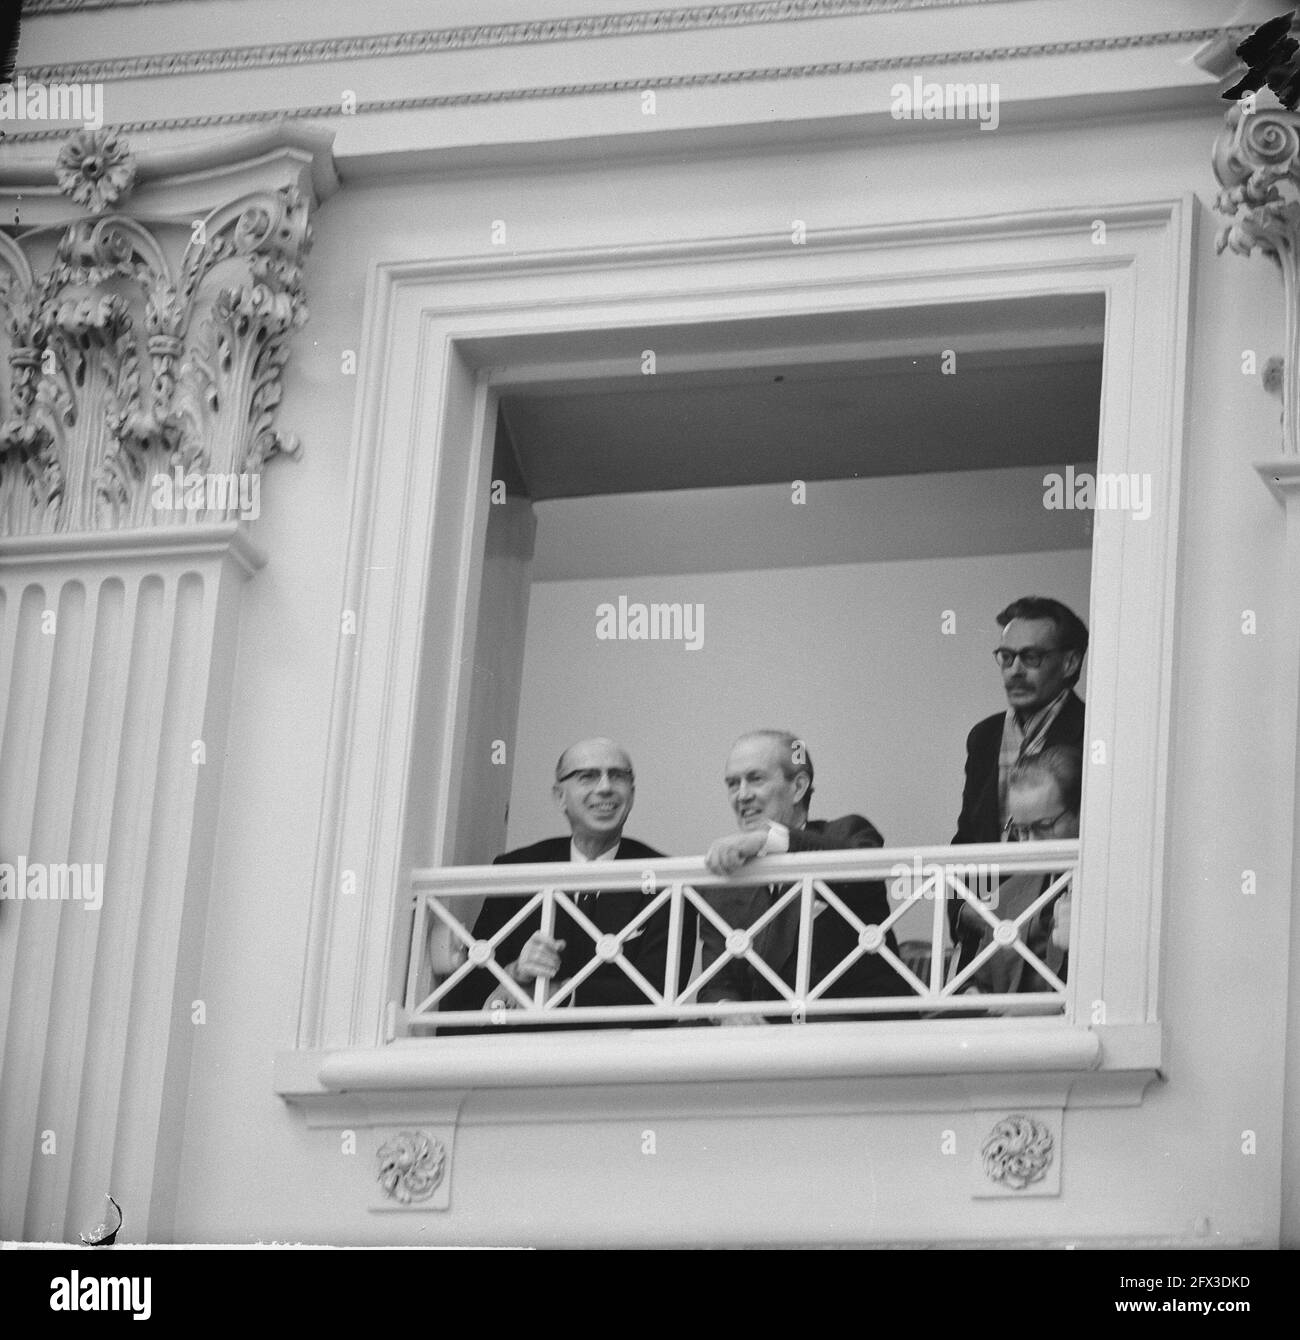 Minister Luns during his speech in the Lower House, foreign interest in Lower House, left Mr. Cidor (Israel) and right Dr. Winterstein (Austria), January 31, 1963, speeches, The Netherlands, 20th century press agency photo, news to remember, documentary, historic photography 1945-1990, visual stories, human history of the Twentieth Century, capturing moments in time Stock Photo